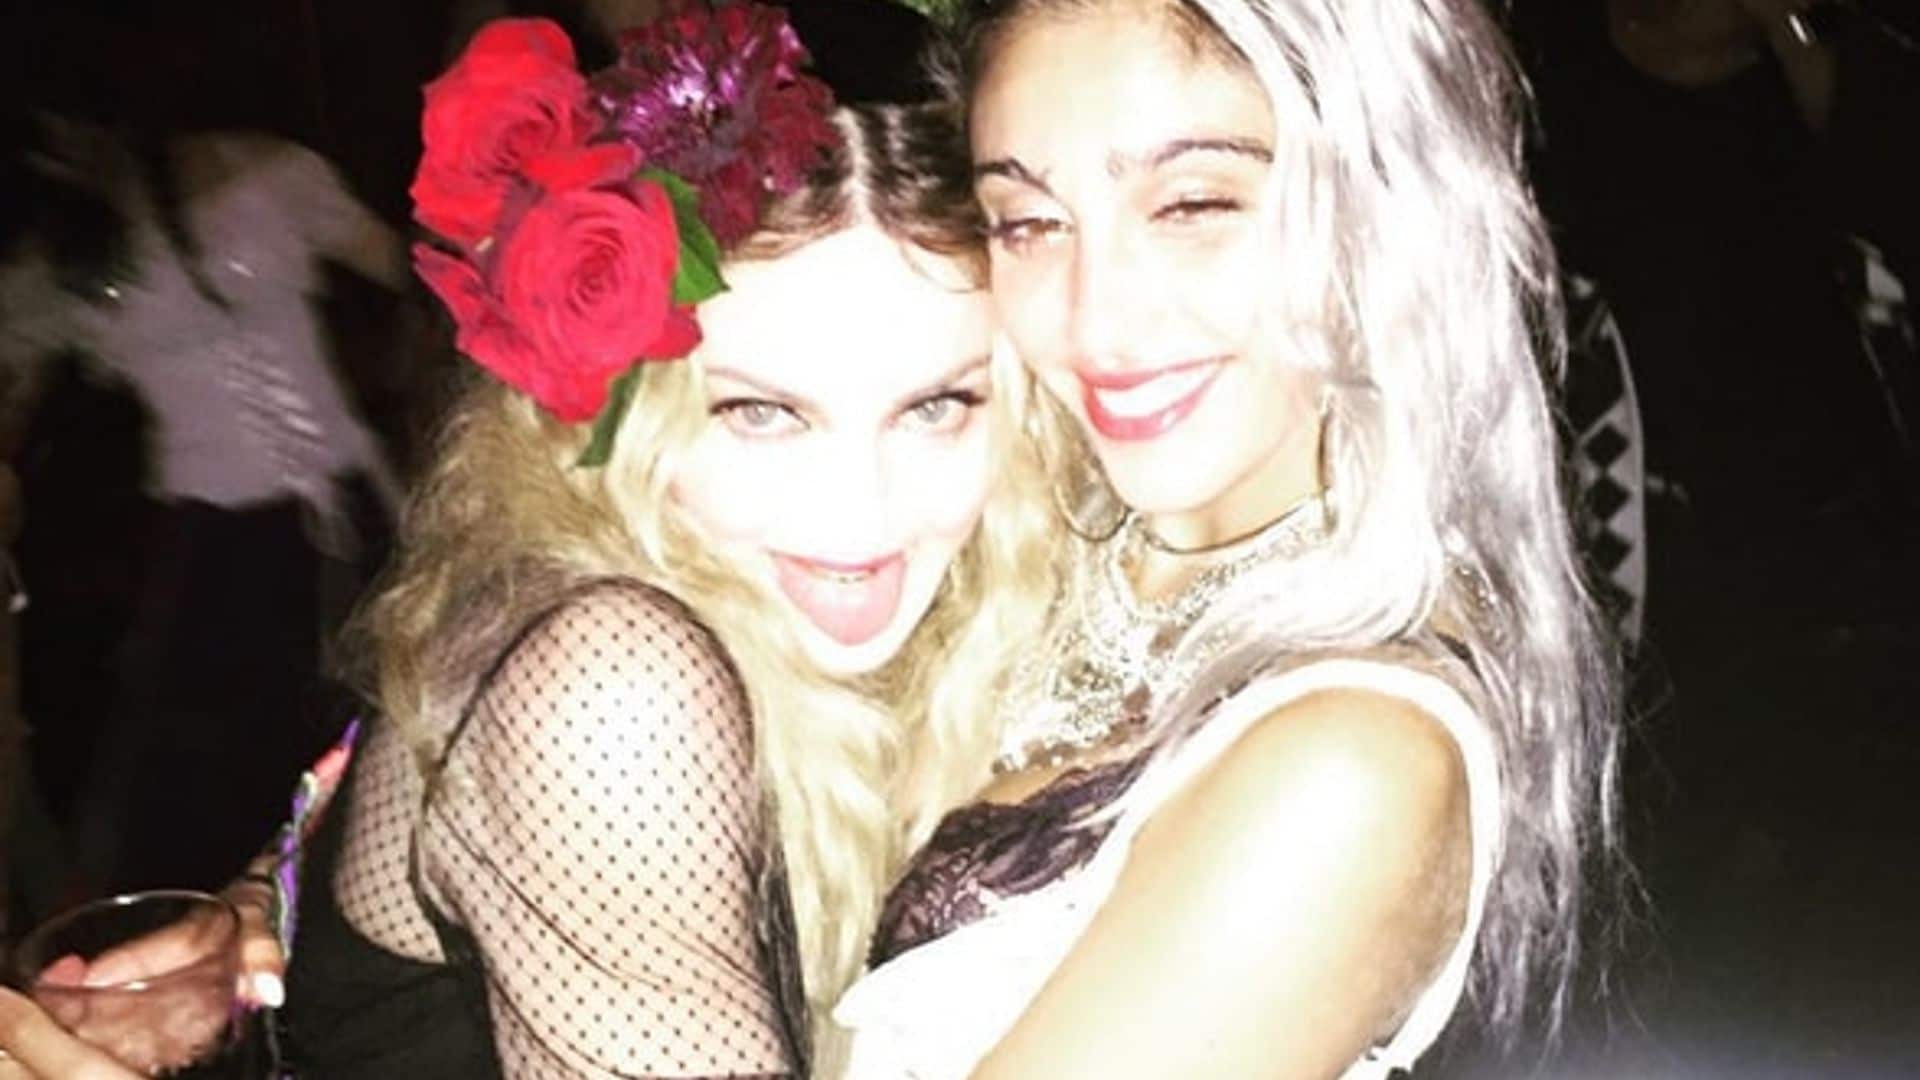 Madonna parties with Lourdes at gypsy-themed birthday bash